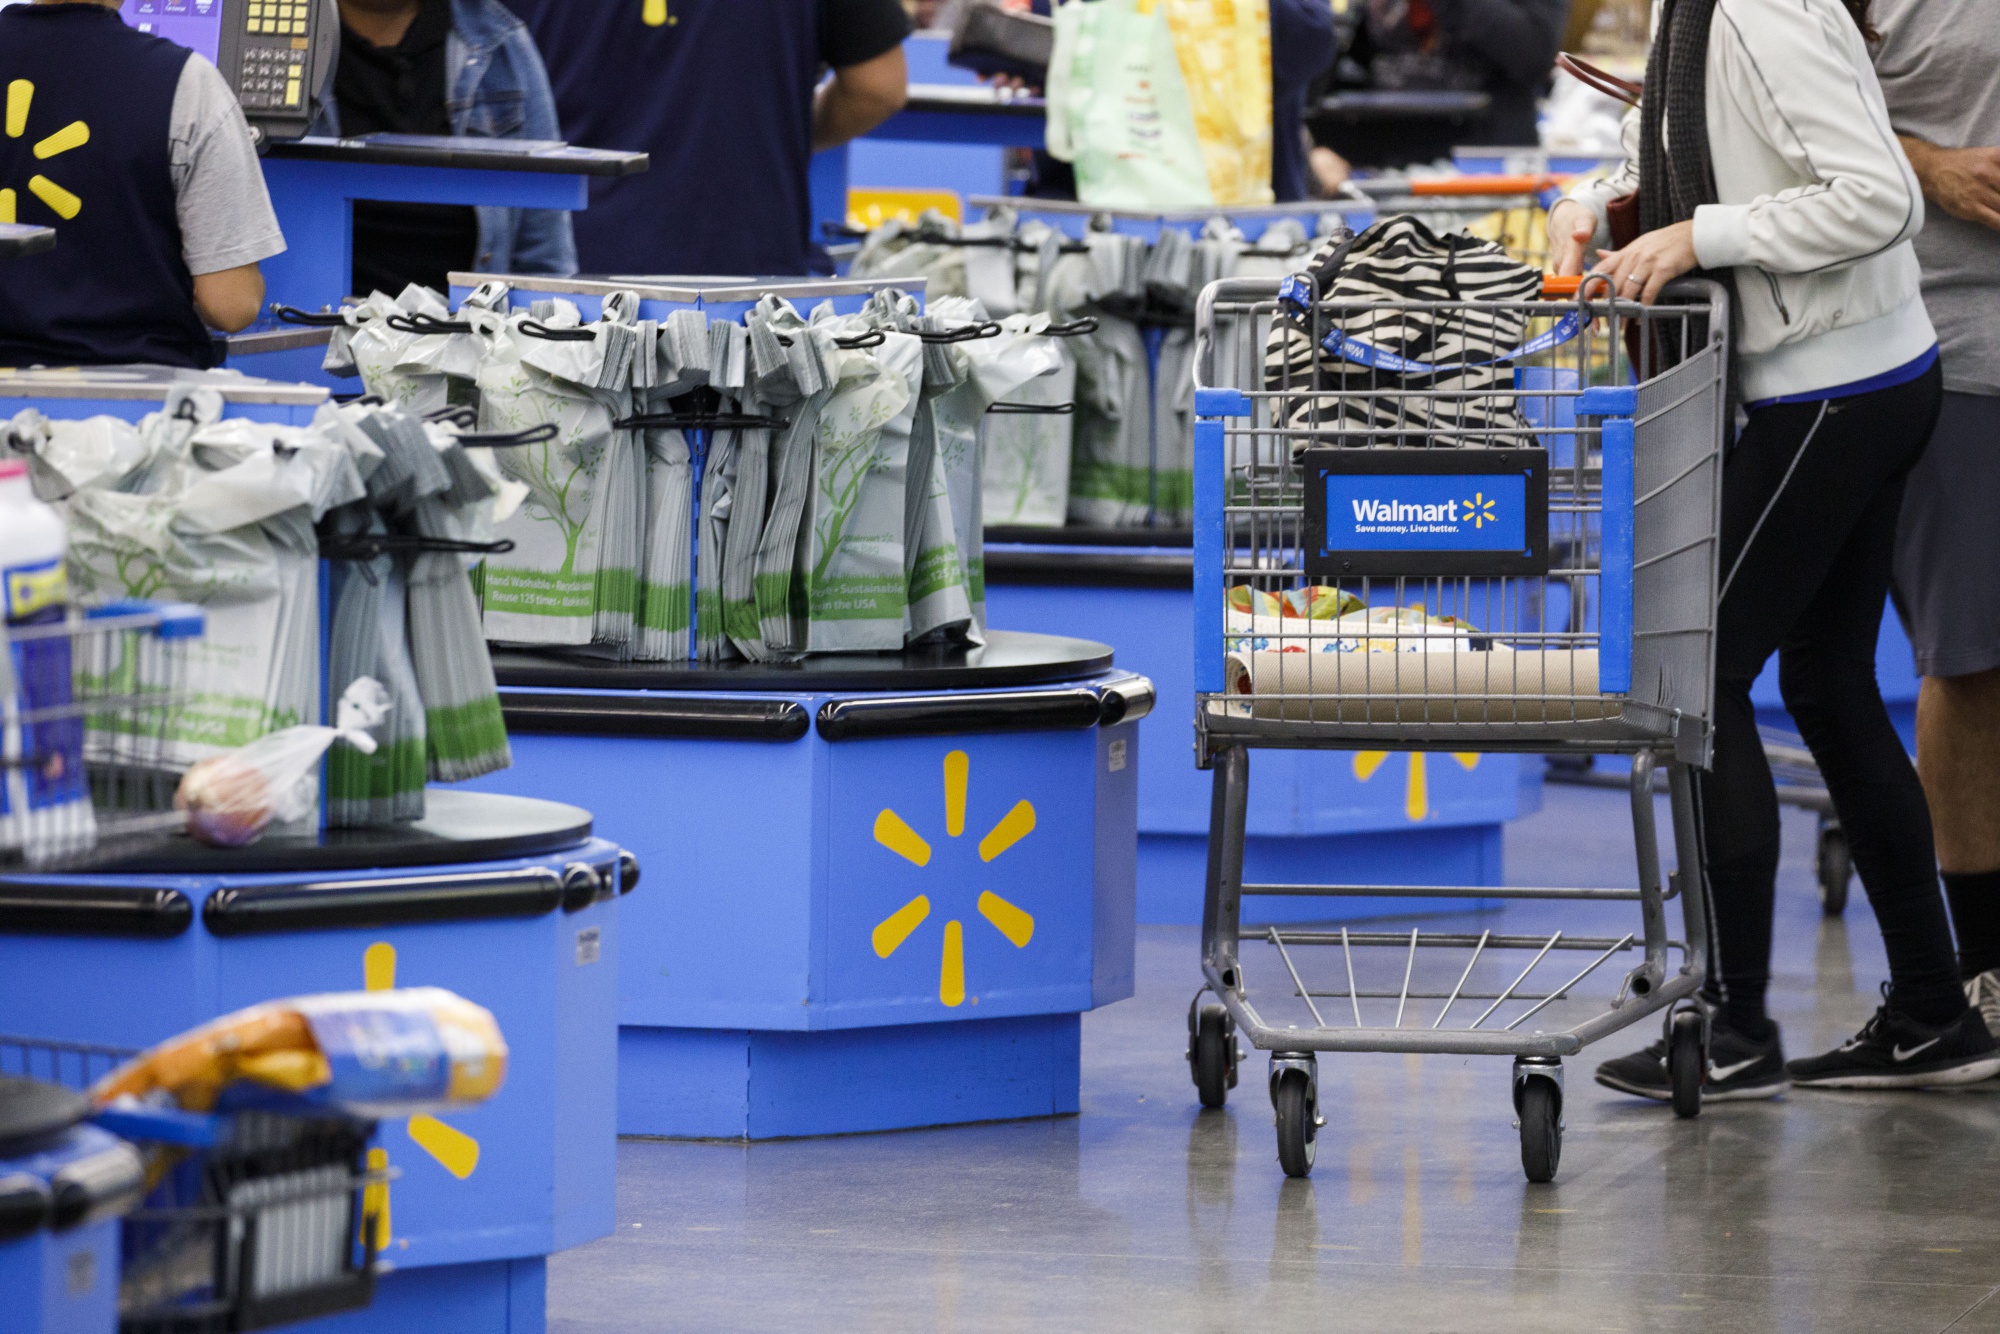 Walmart Accused of Using Charity to Sway Cities Where It Wants to